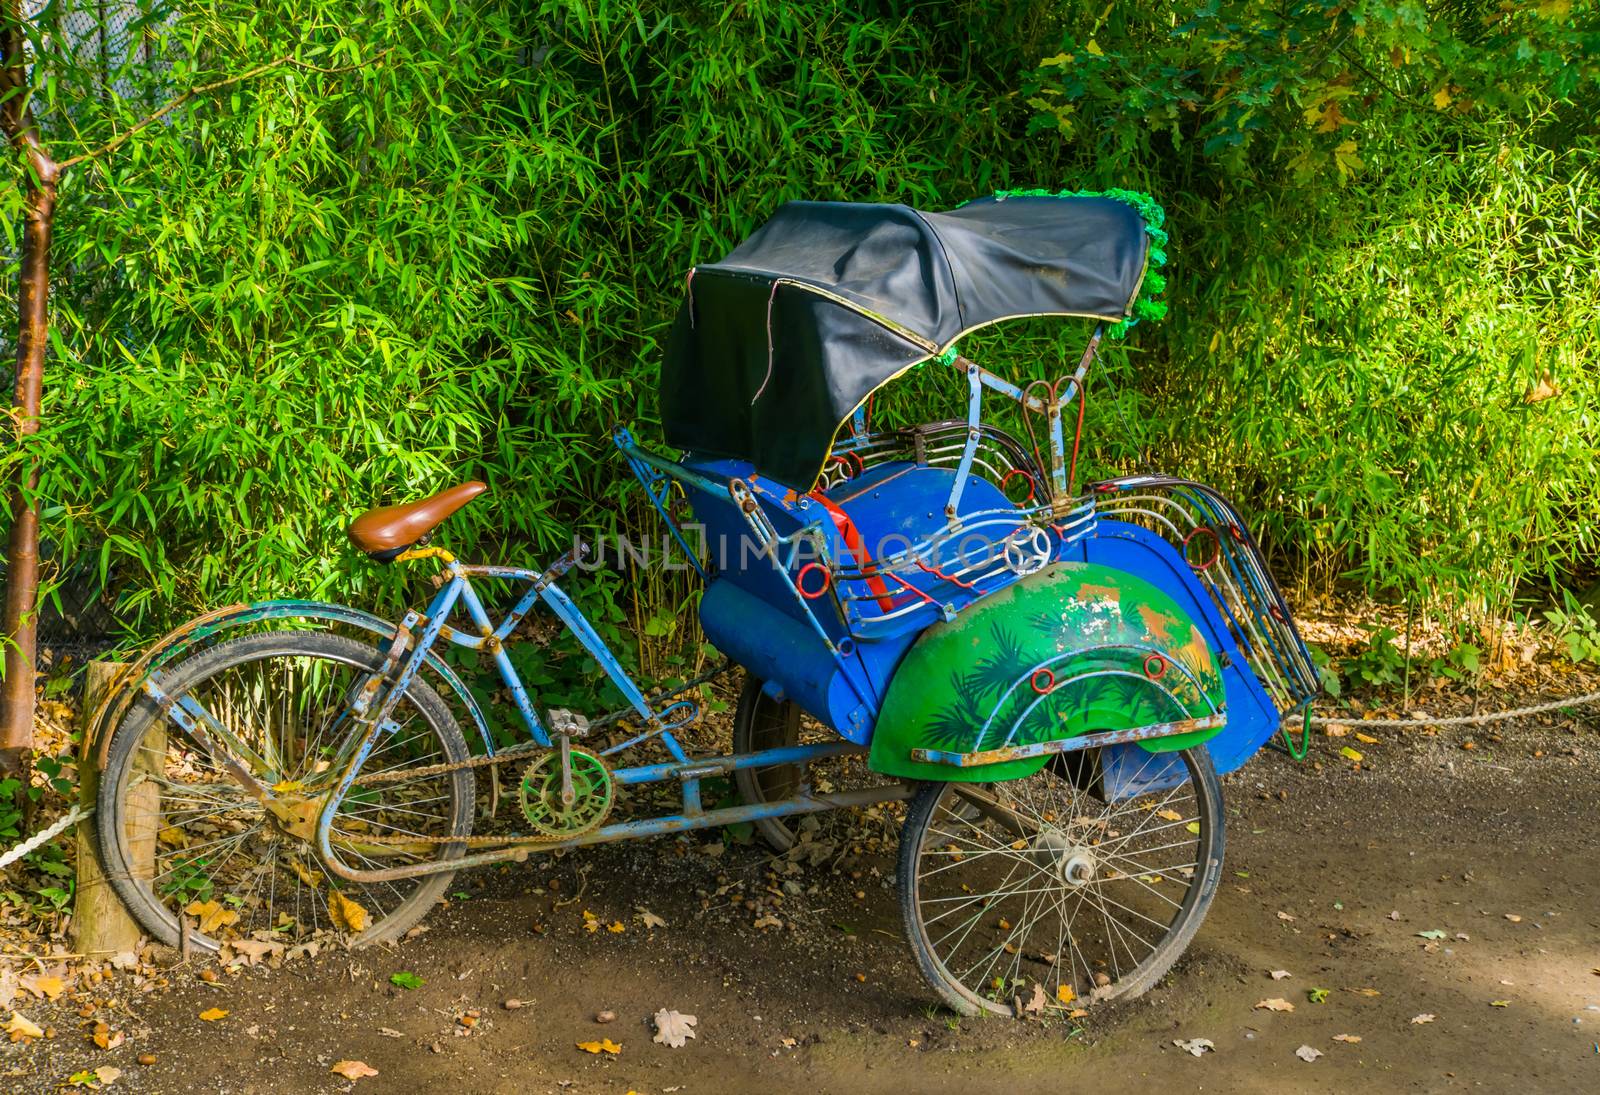 Side view of a traditional Asian cycle rickshaw, Vintage transportation vehicle from Asia